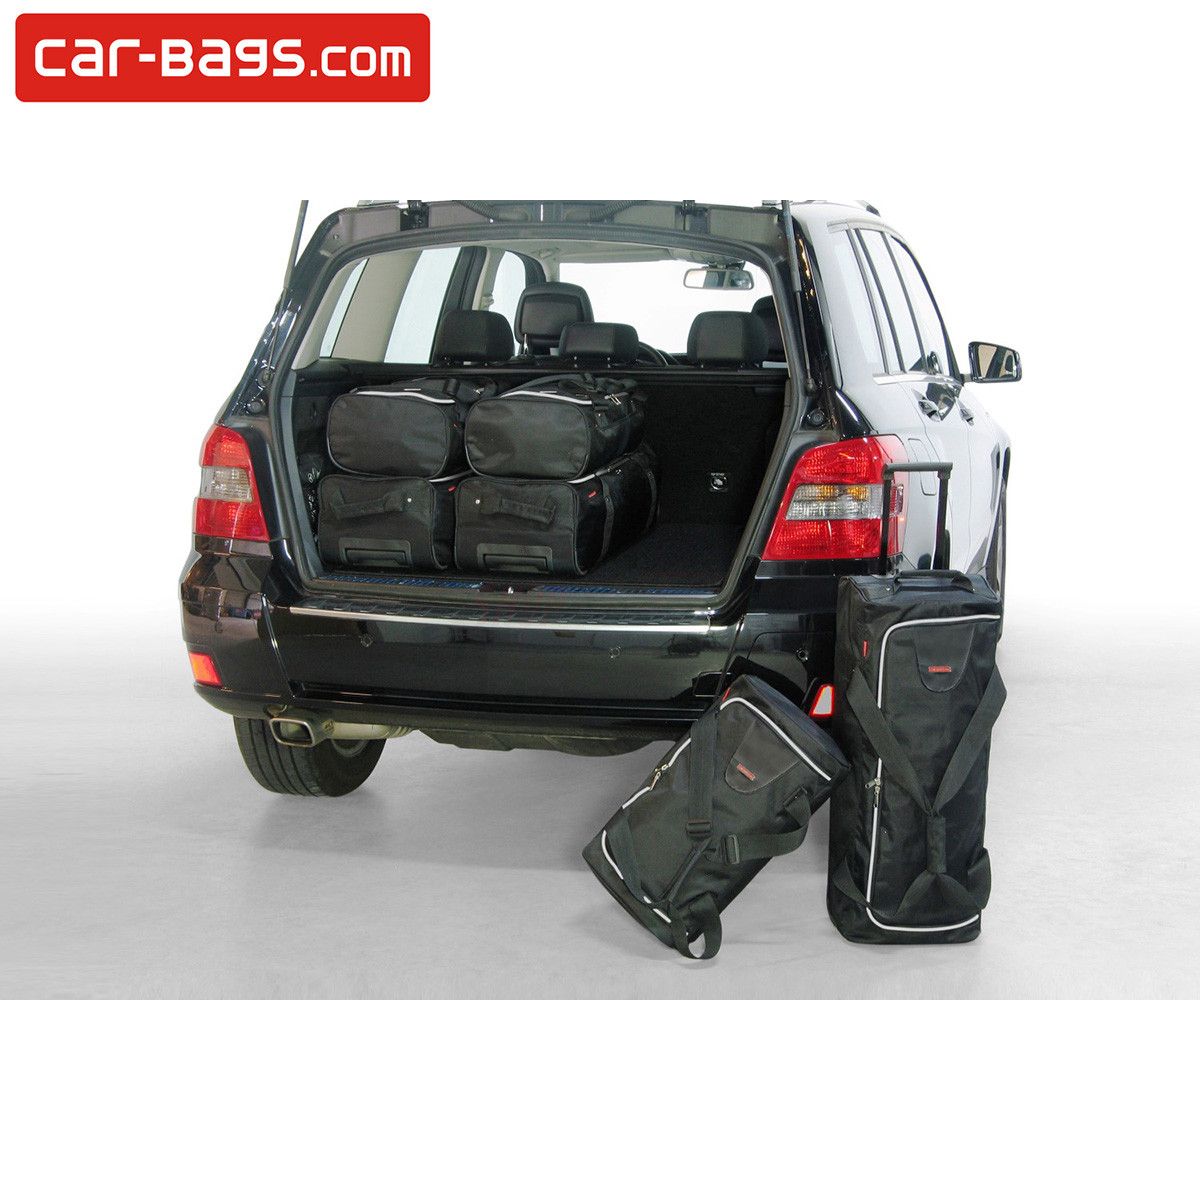 Travel bags fits Mercedes-Benz GLK (X204) tailor made (6 bags), Time and  space saving for € 379, Perfect fit Car Bags